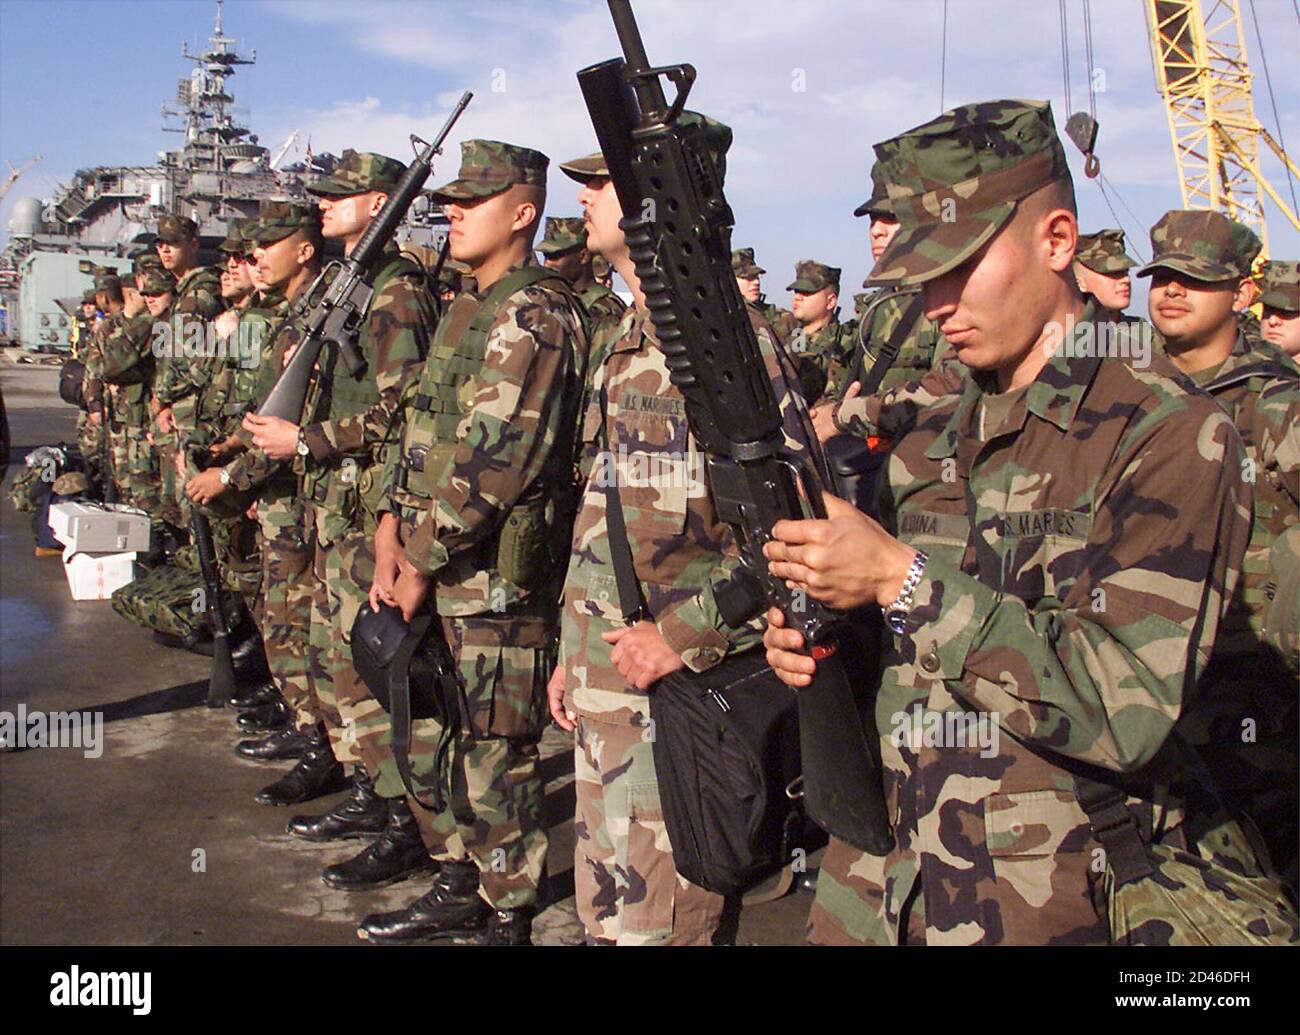 U.S. Marine Cpl. Esteban Medina inspects his M-203 rifle while waiting with the rest of Battalion Landing Team 14 to board the USS Bonhomme Richard at Naval Station San Diego enroute to the Arabian Sea on November 30, 2001. U.S. Defense Secretary Donald Rumsfeld on Friday rejected any negotiated surrender of the besieged Afghan Taliban stronghold of Kandahar in exchange for amnesty for Taliban supreme leader Mullah Mohammad Omar. REUTERS/Fred Greaves  FG/ME Stock Photo